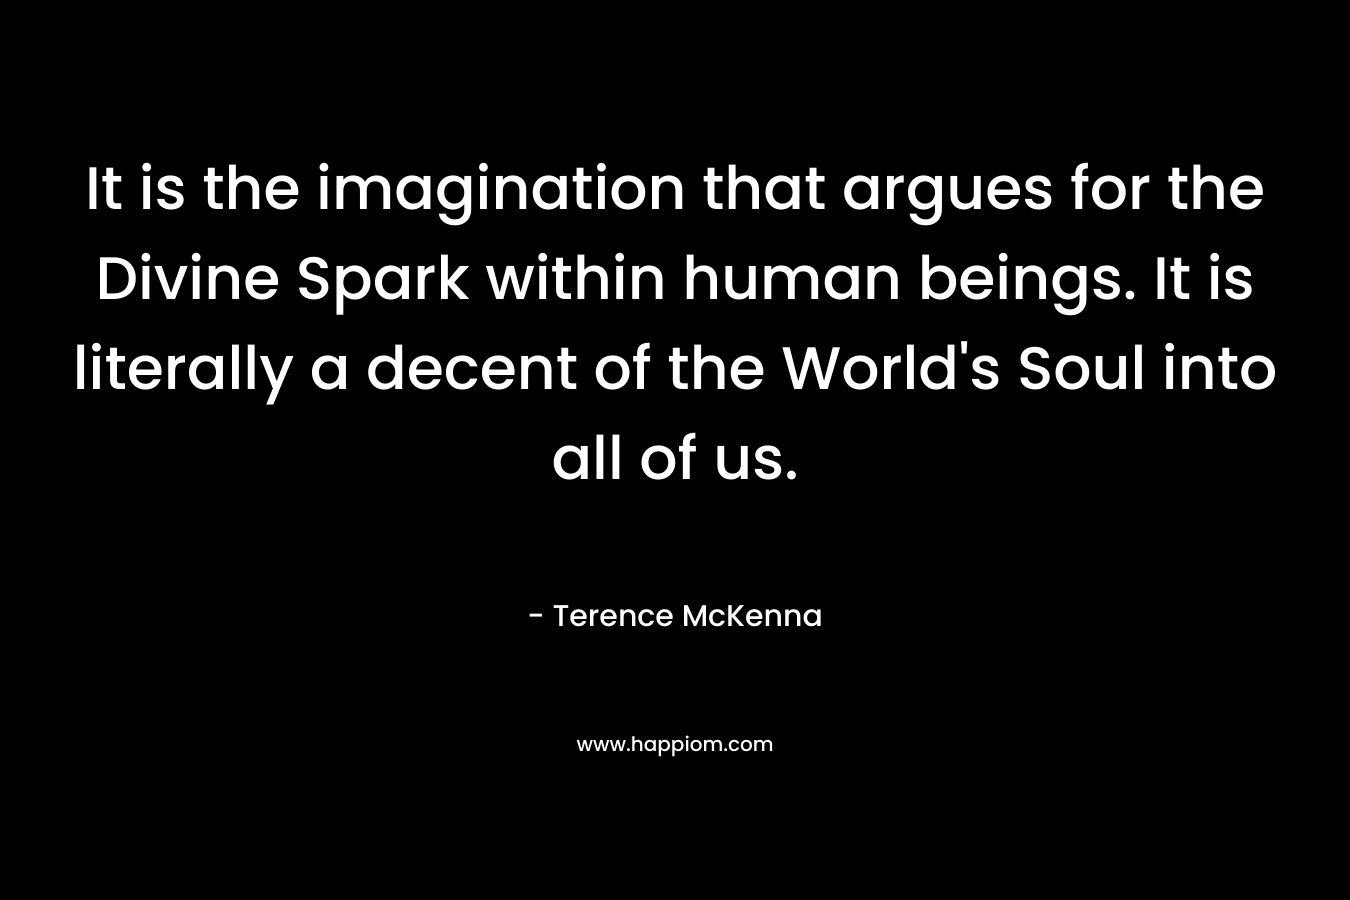 It is the imagination that argues for the Divine Spark within human beings. It is literally a decent of the World’s Soul into all of us. – Terence McKenna